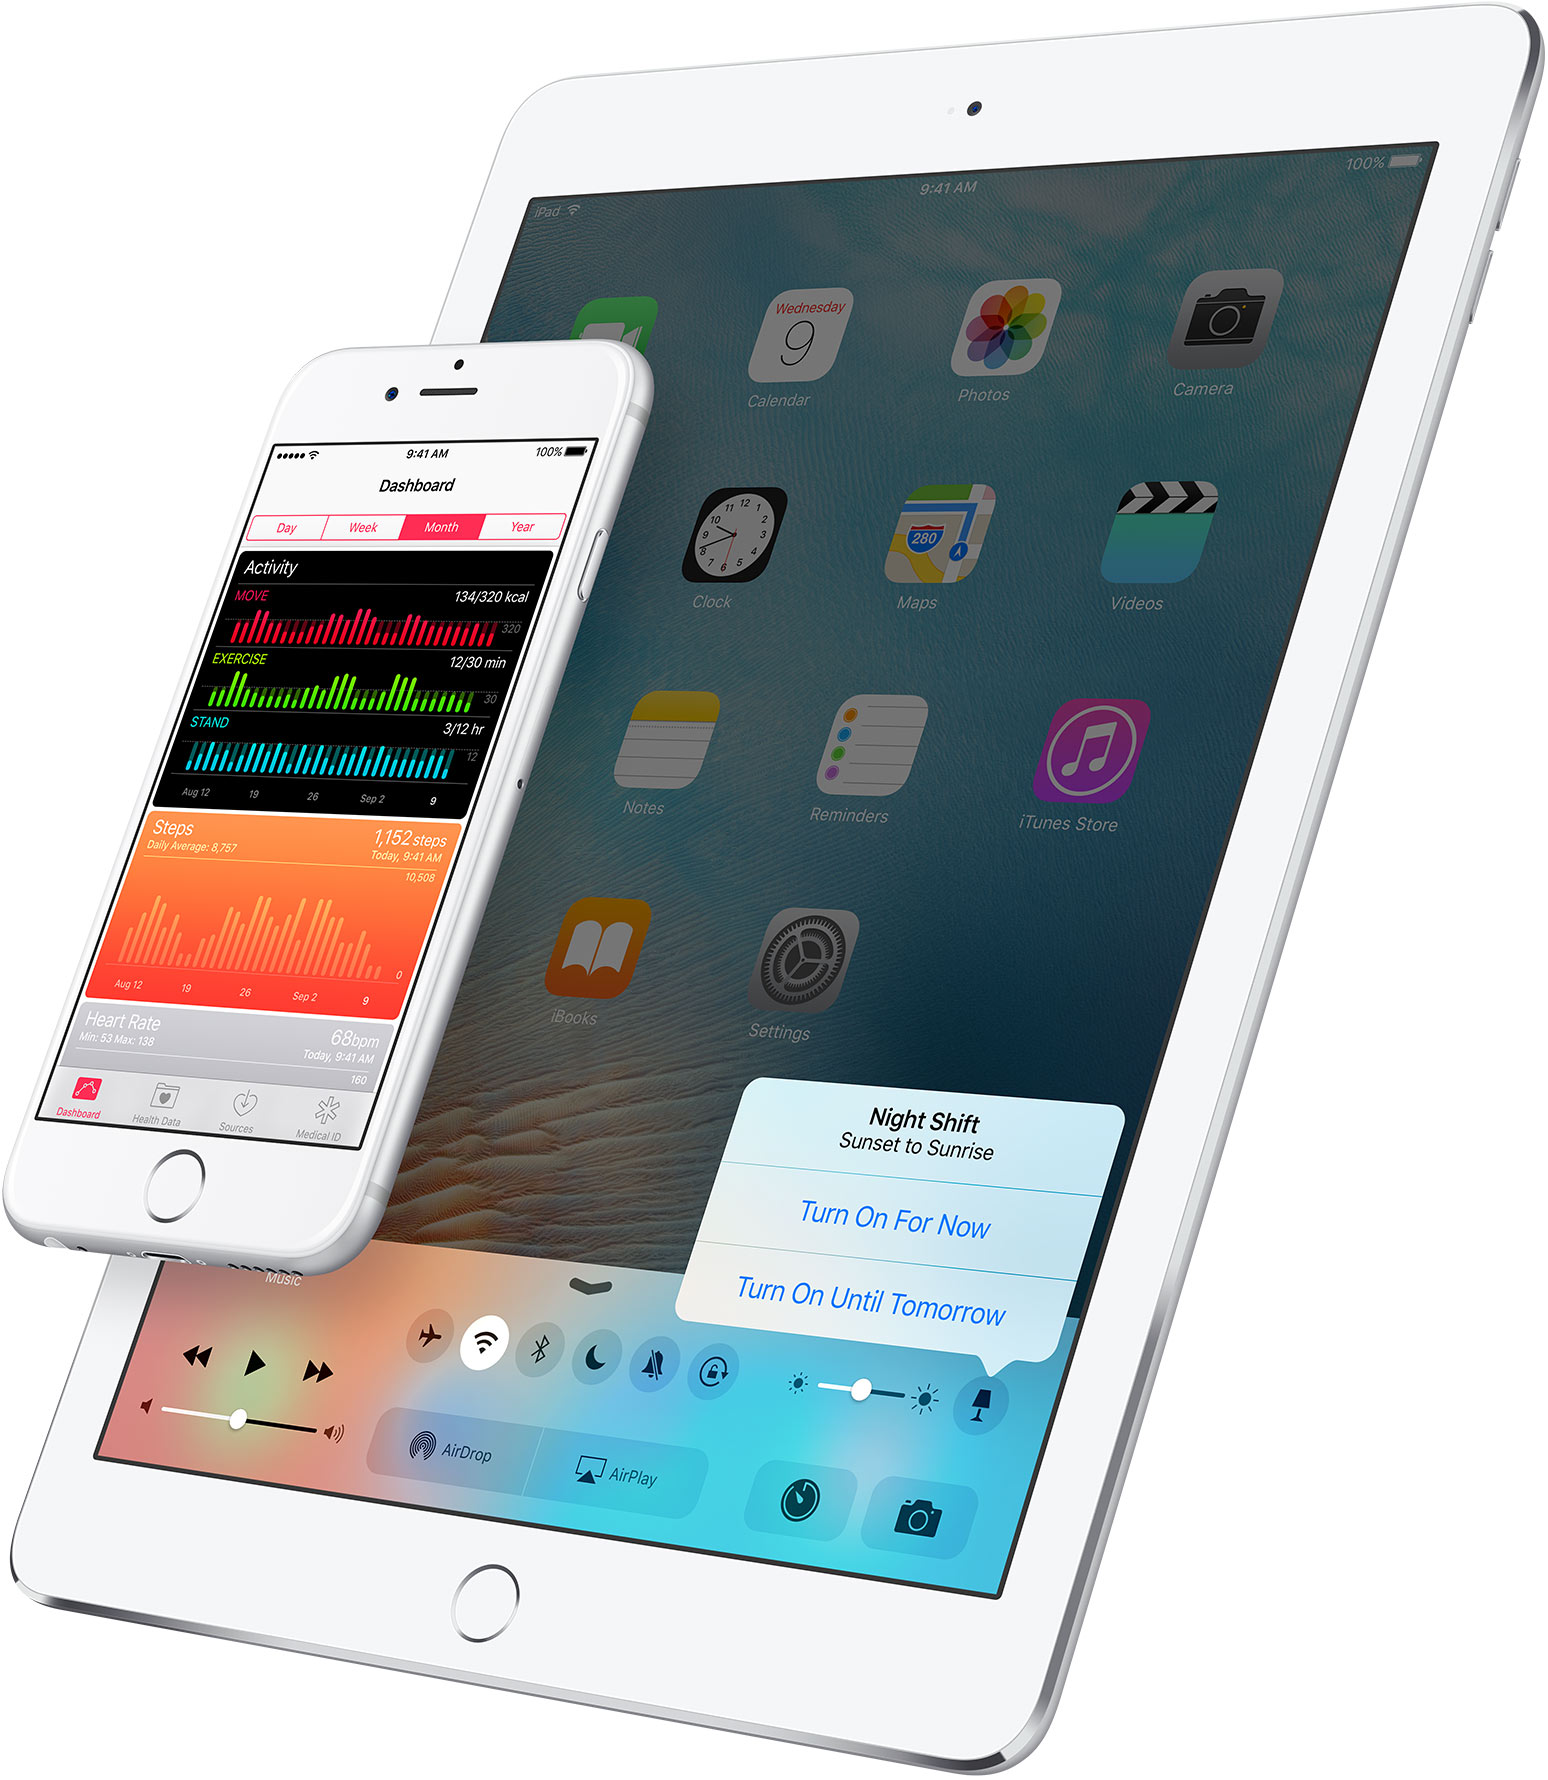 This Is How You Will Use ‘Night Shift’ On The iPhone and iPad